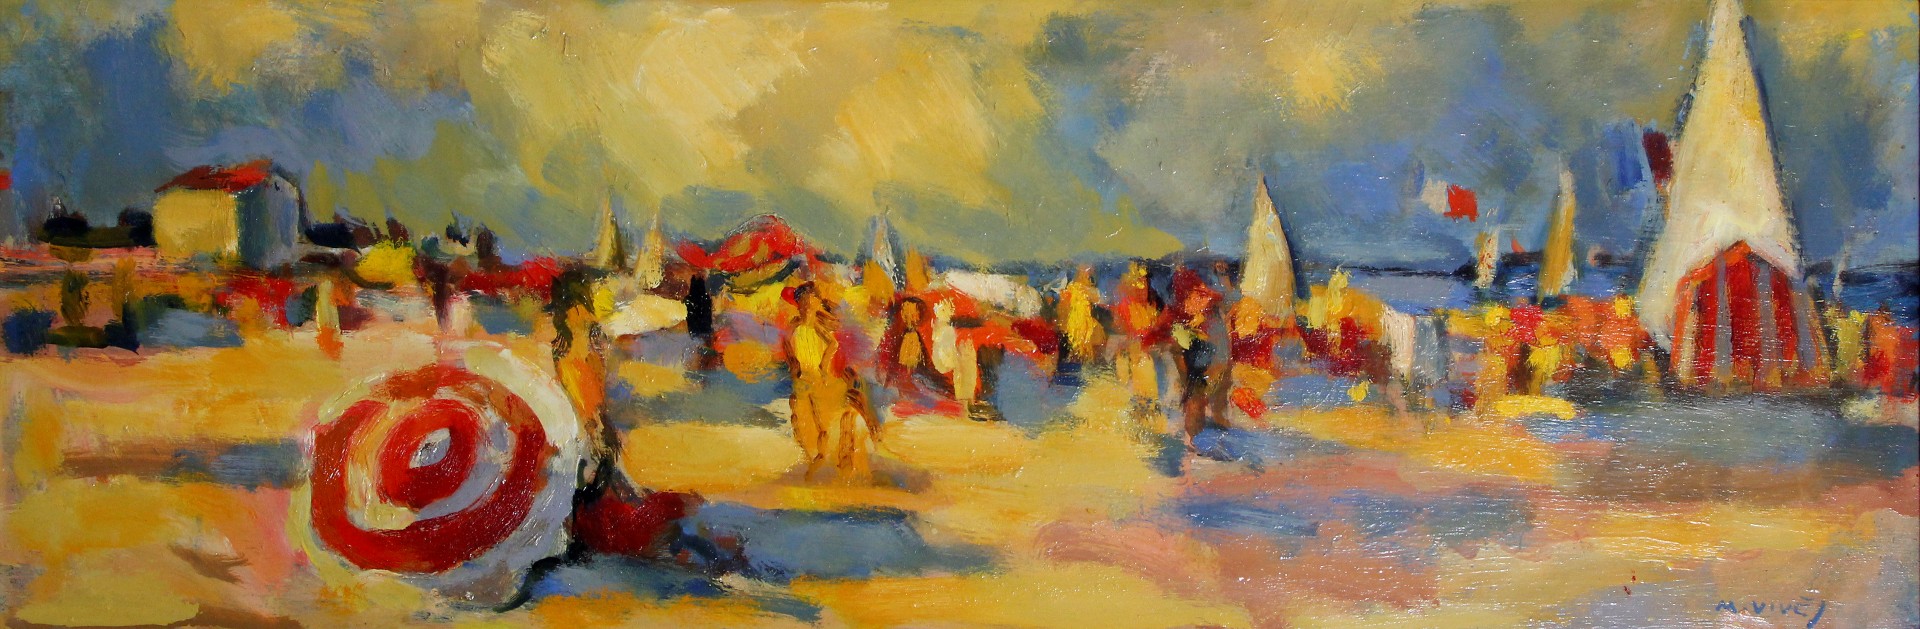 Martin Vives (1905-1991) - 'Canet-Plage' (depicting a busy summer beach scene), oil on board,